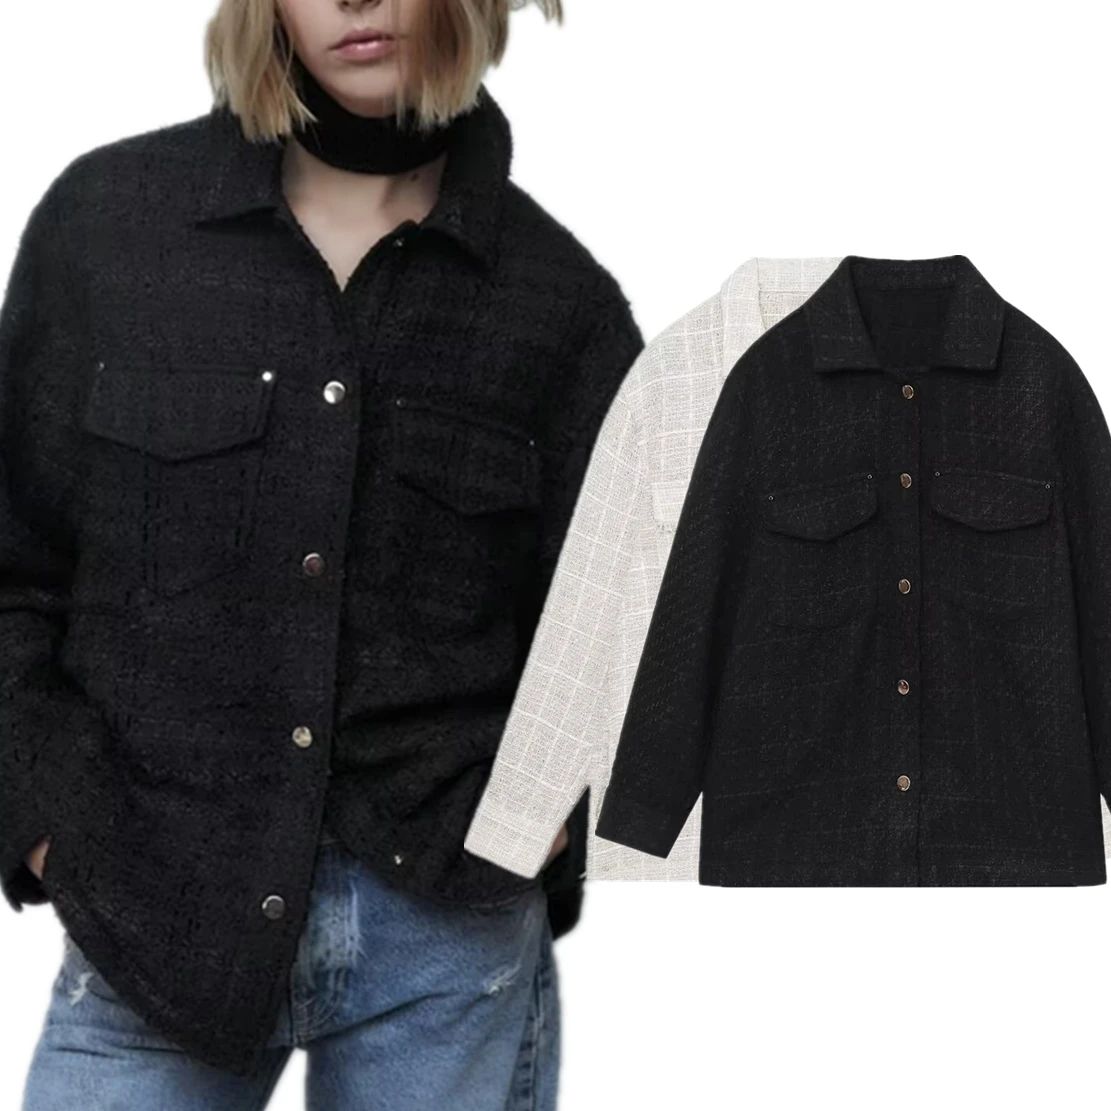 

Dave&Di Autumn And Winter New Women's Texture Shirt Boyfriend Casual Vintage Tweed Blouse Women Tops